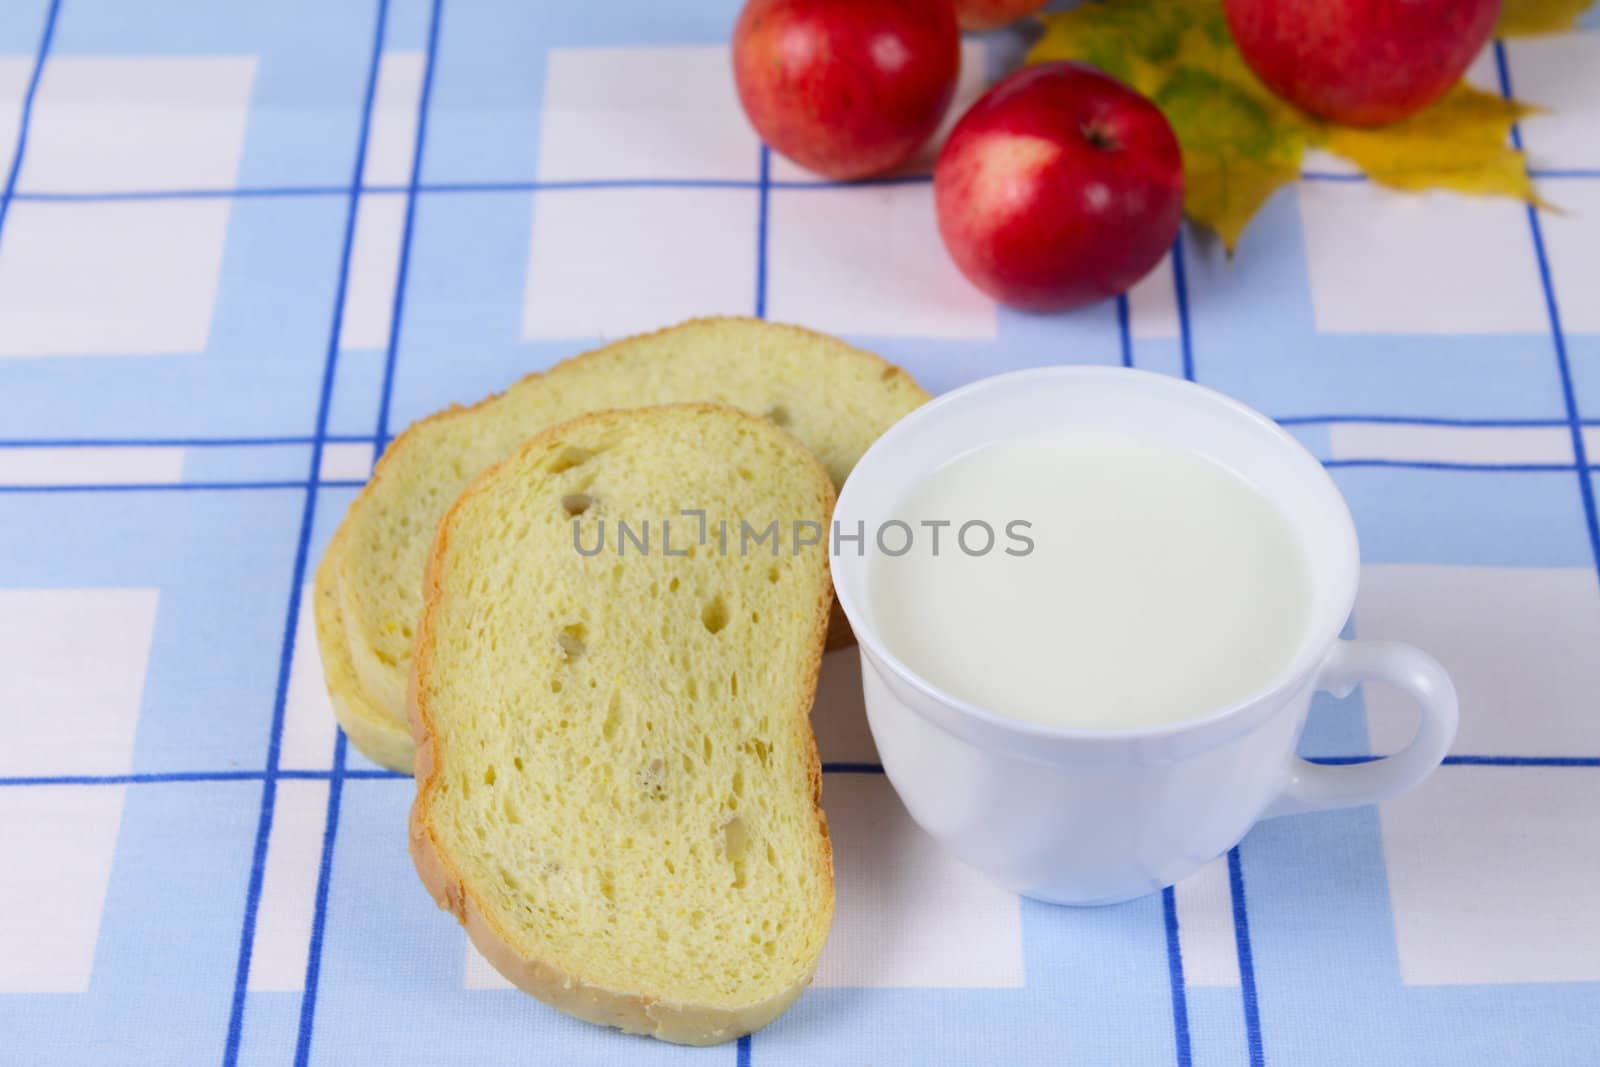 Cup of milk with a cornbread and apples on a blue linen napkin removed close up